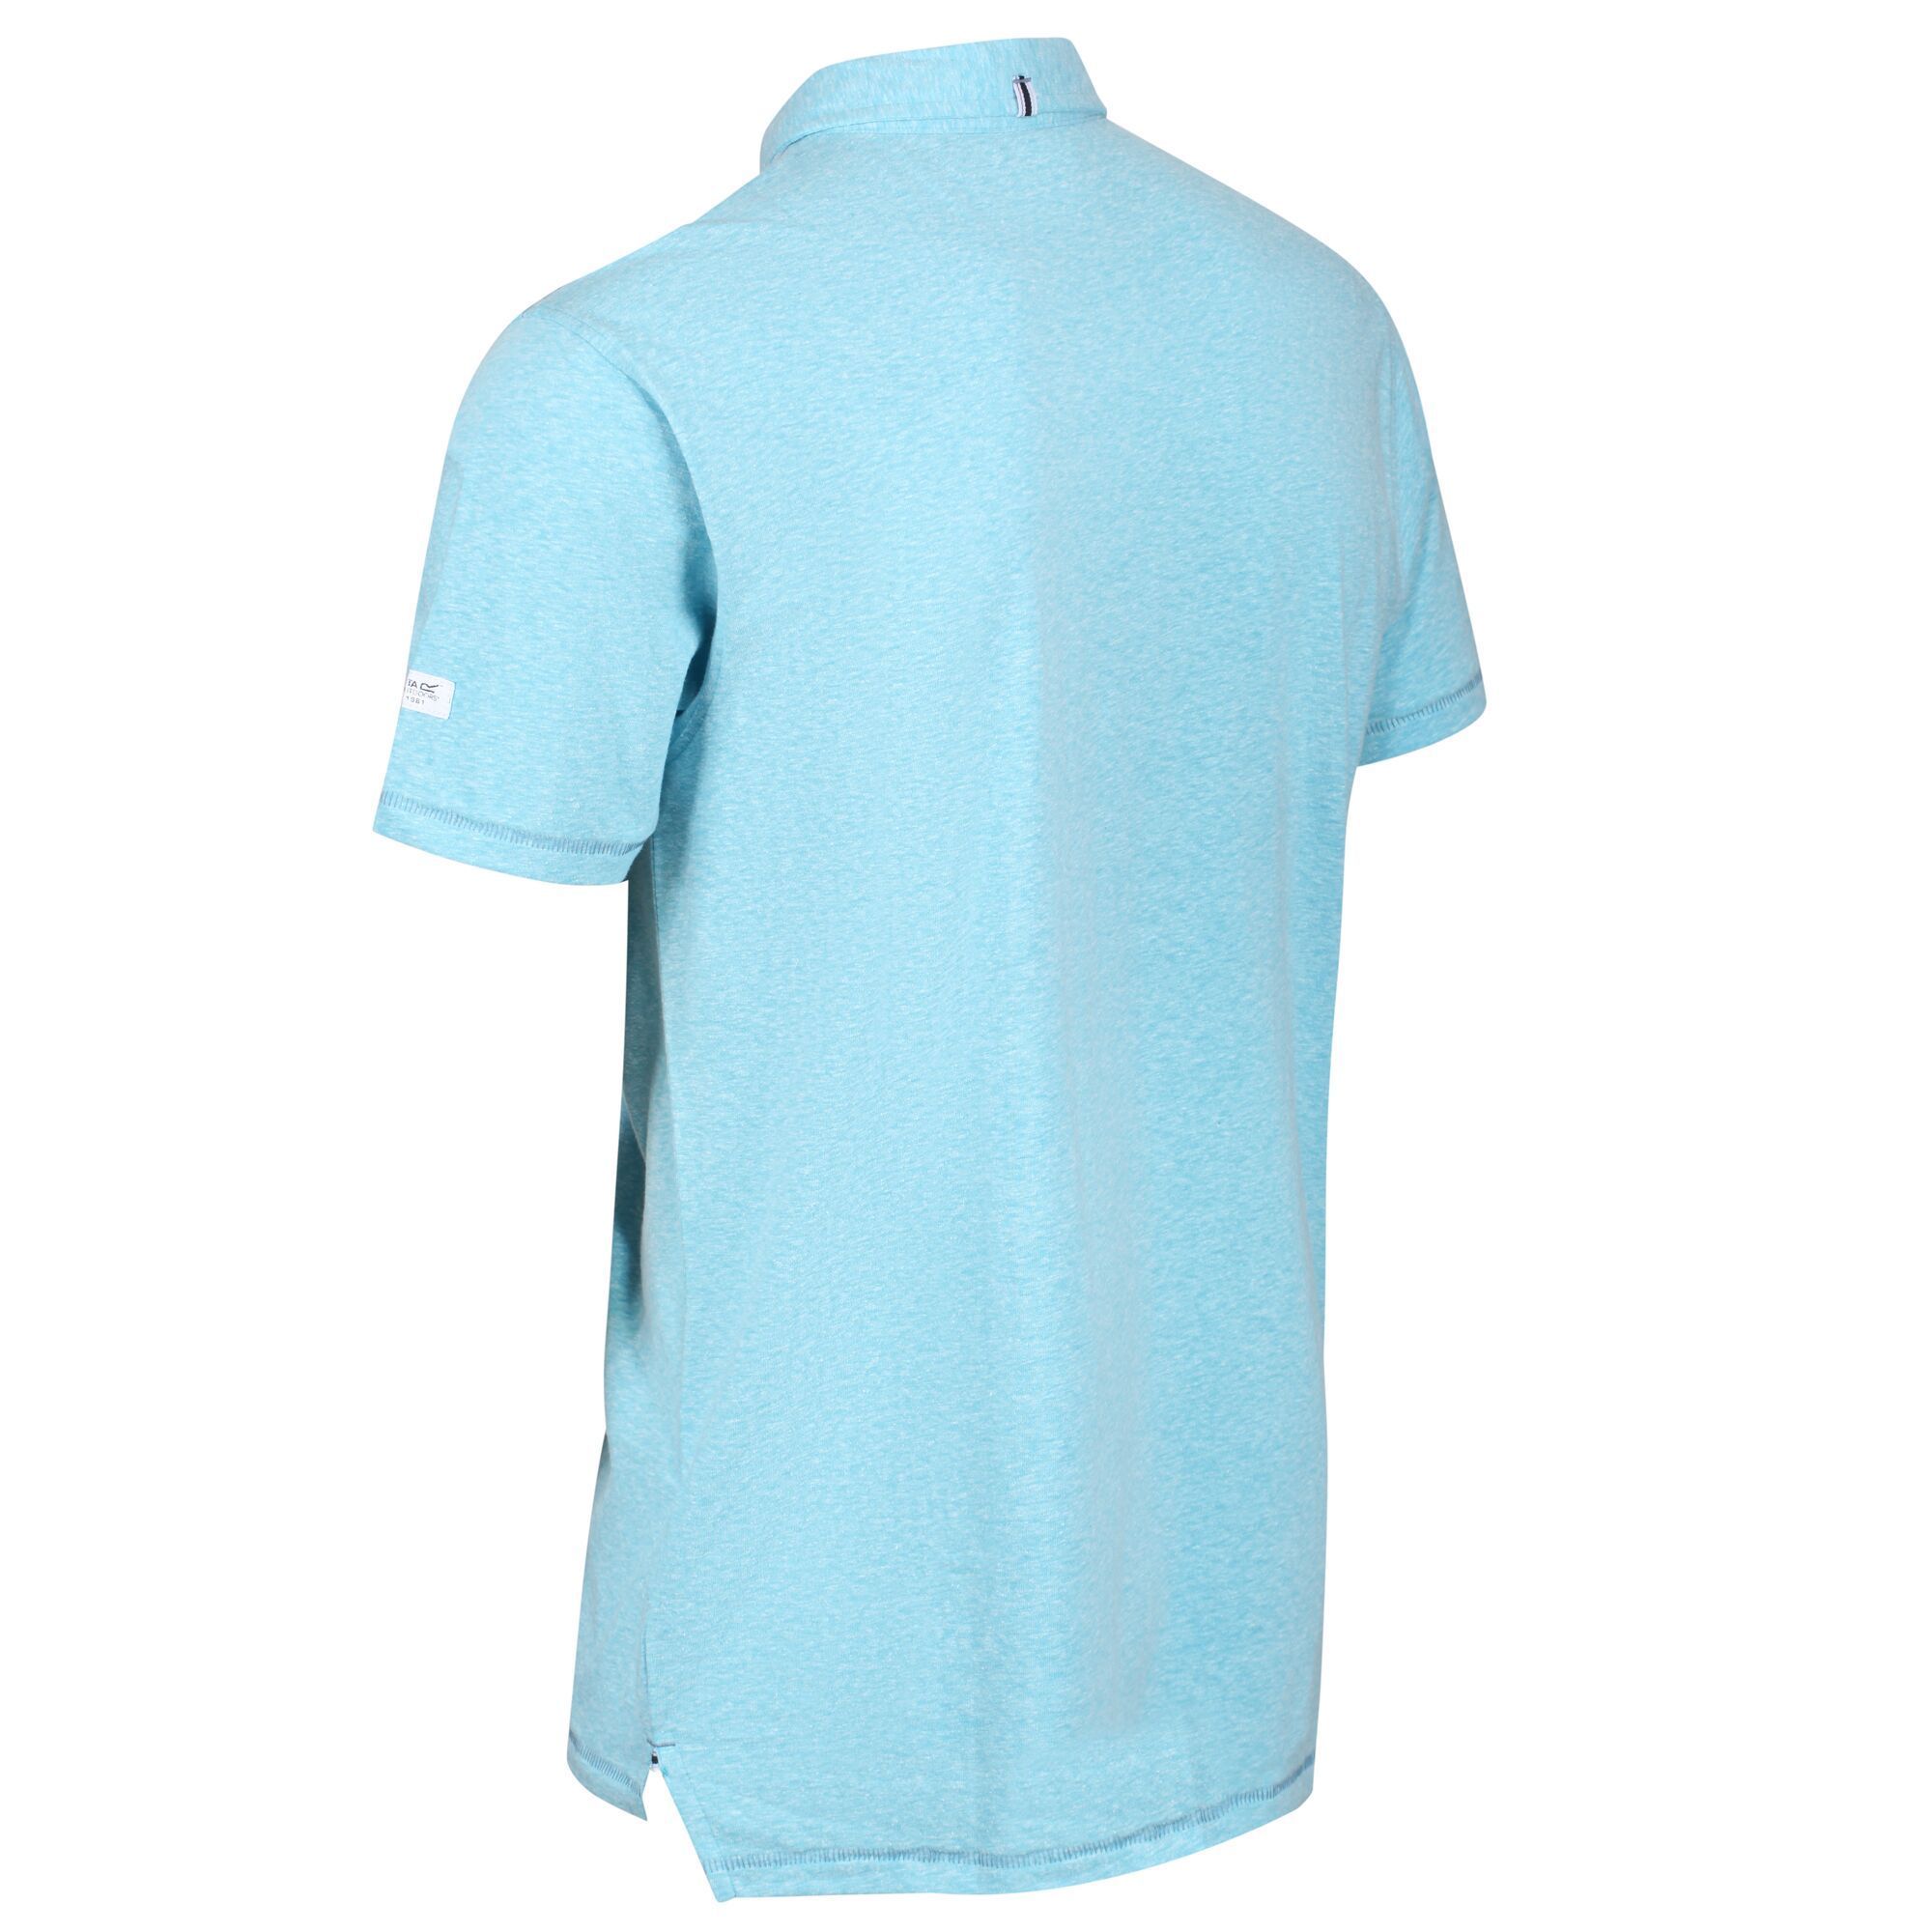 Material: 100% Cotton. 180gsm coolweave material breathable short-sleeved polo shirt. Two-button placket with dyed to match branded buttons. 1 patch pocket on the chest.